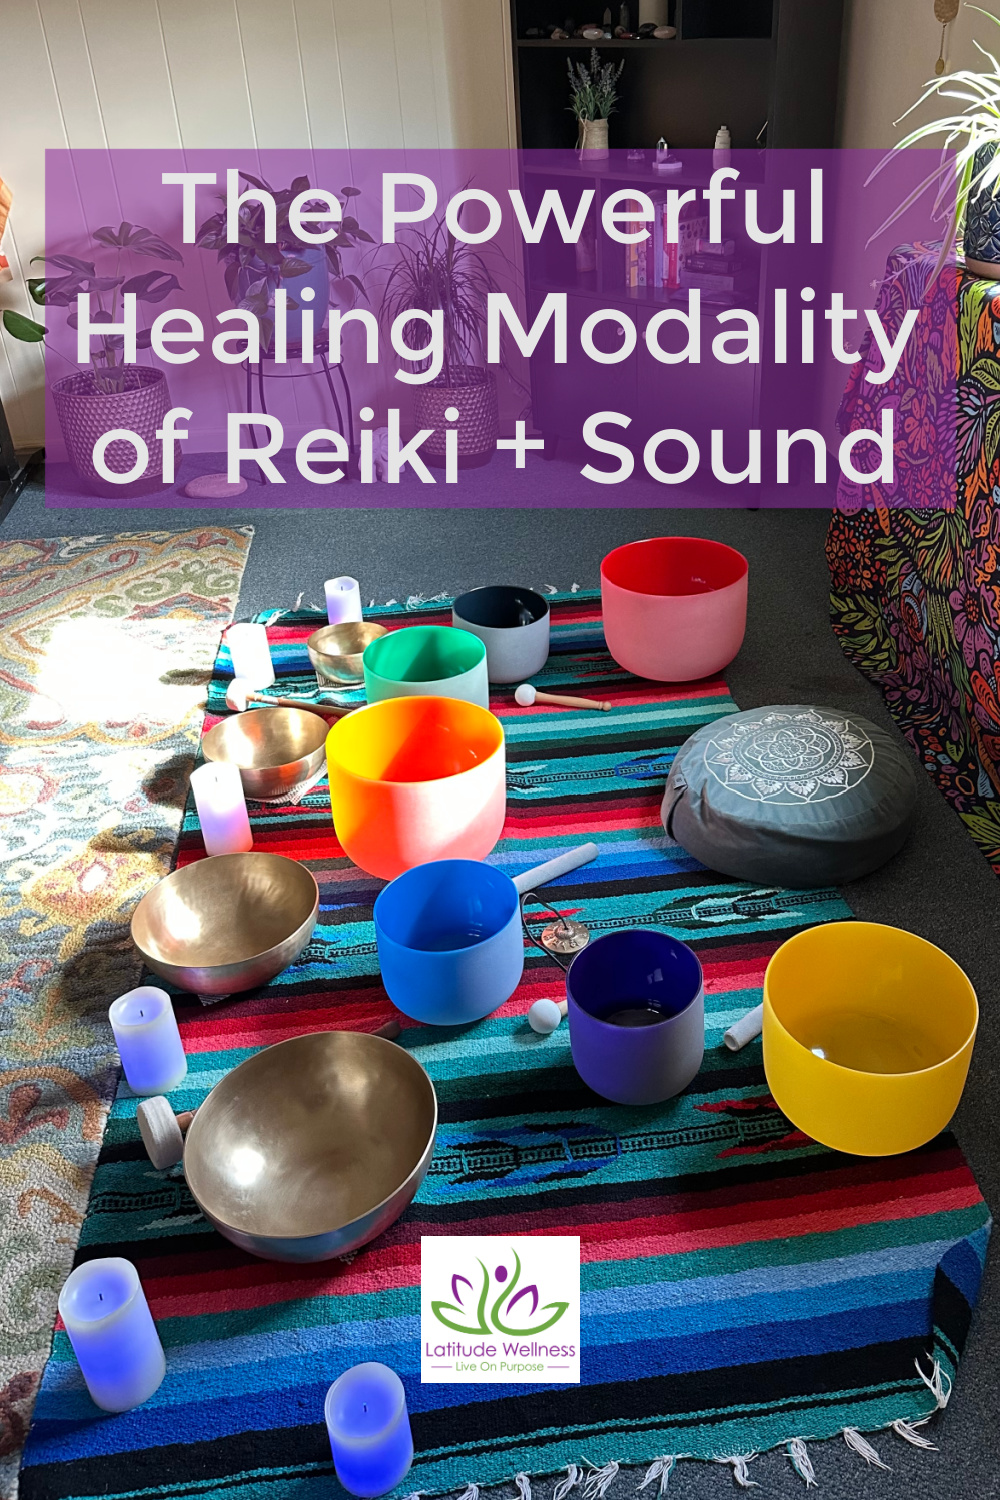 You are currently viewing The Powerful Healing Modality of Reiki and Sound